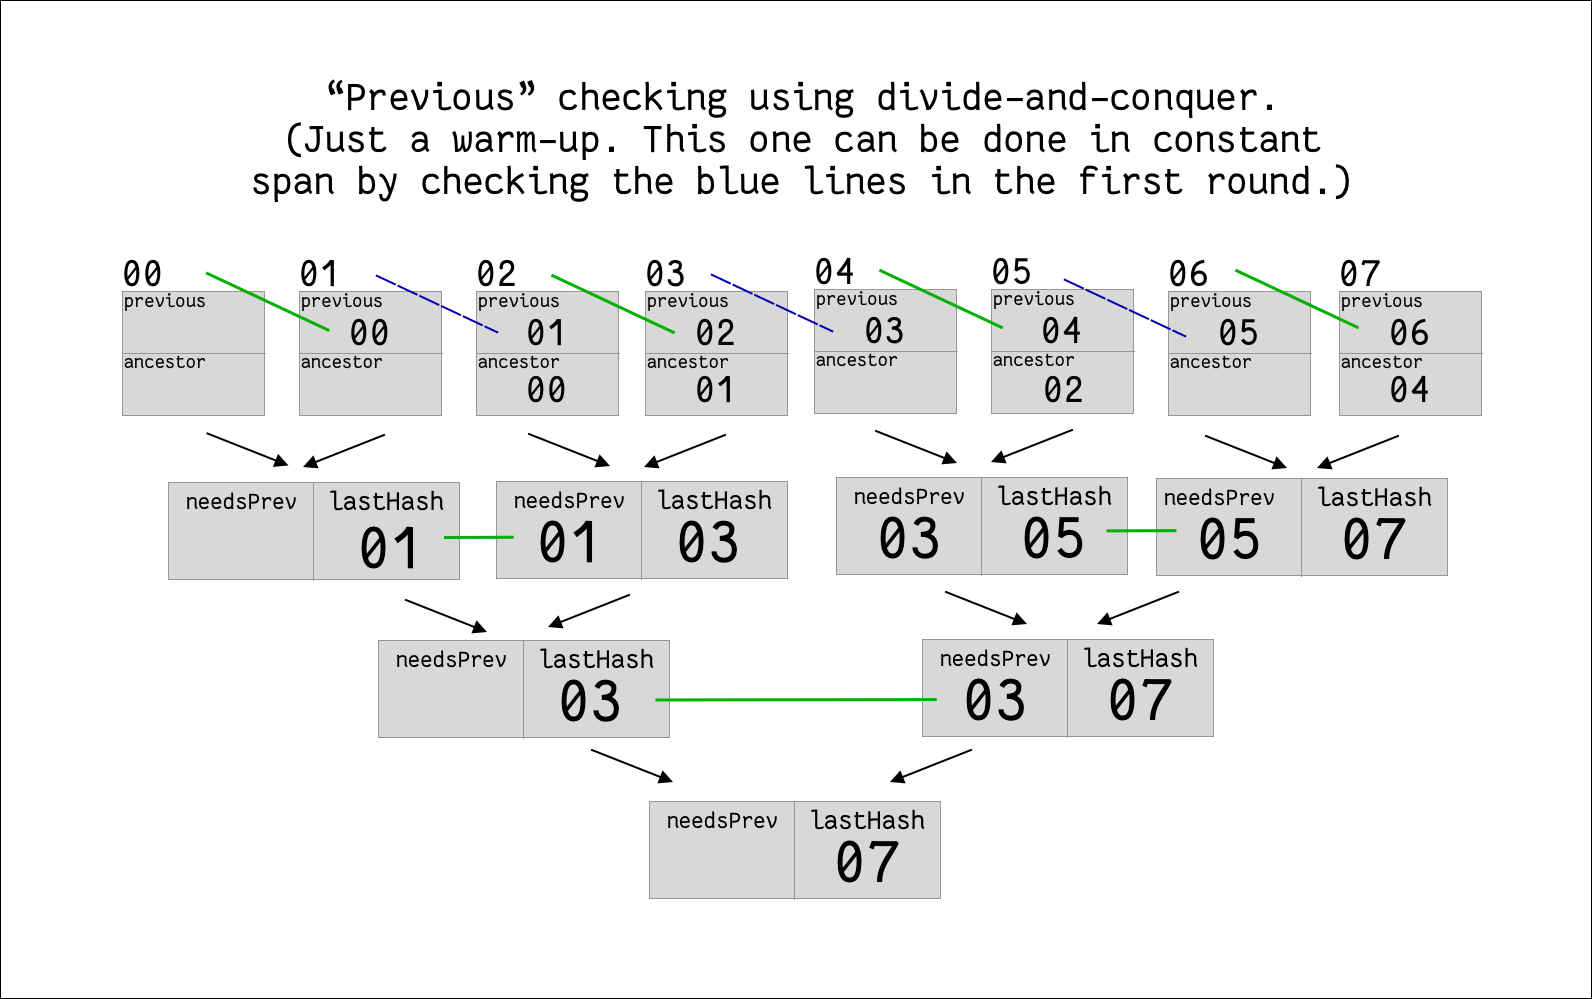 diagram showing a contrived log-span algorithm for 'previous' field validation